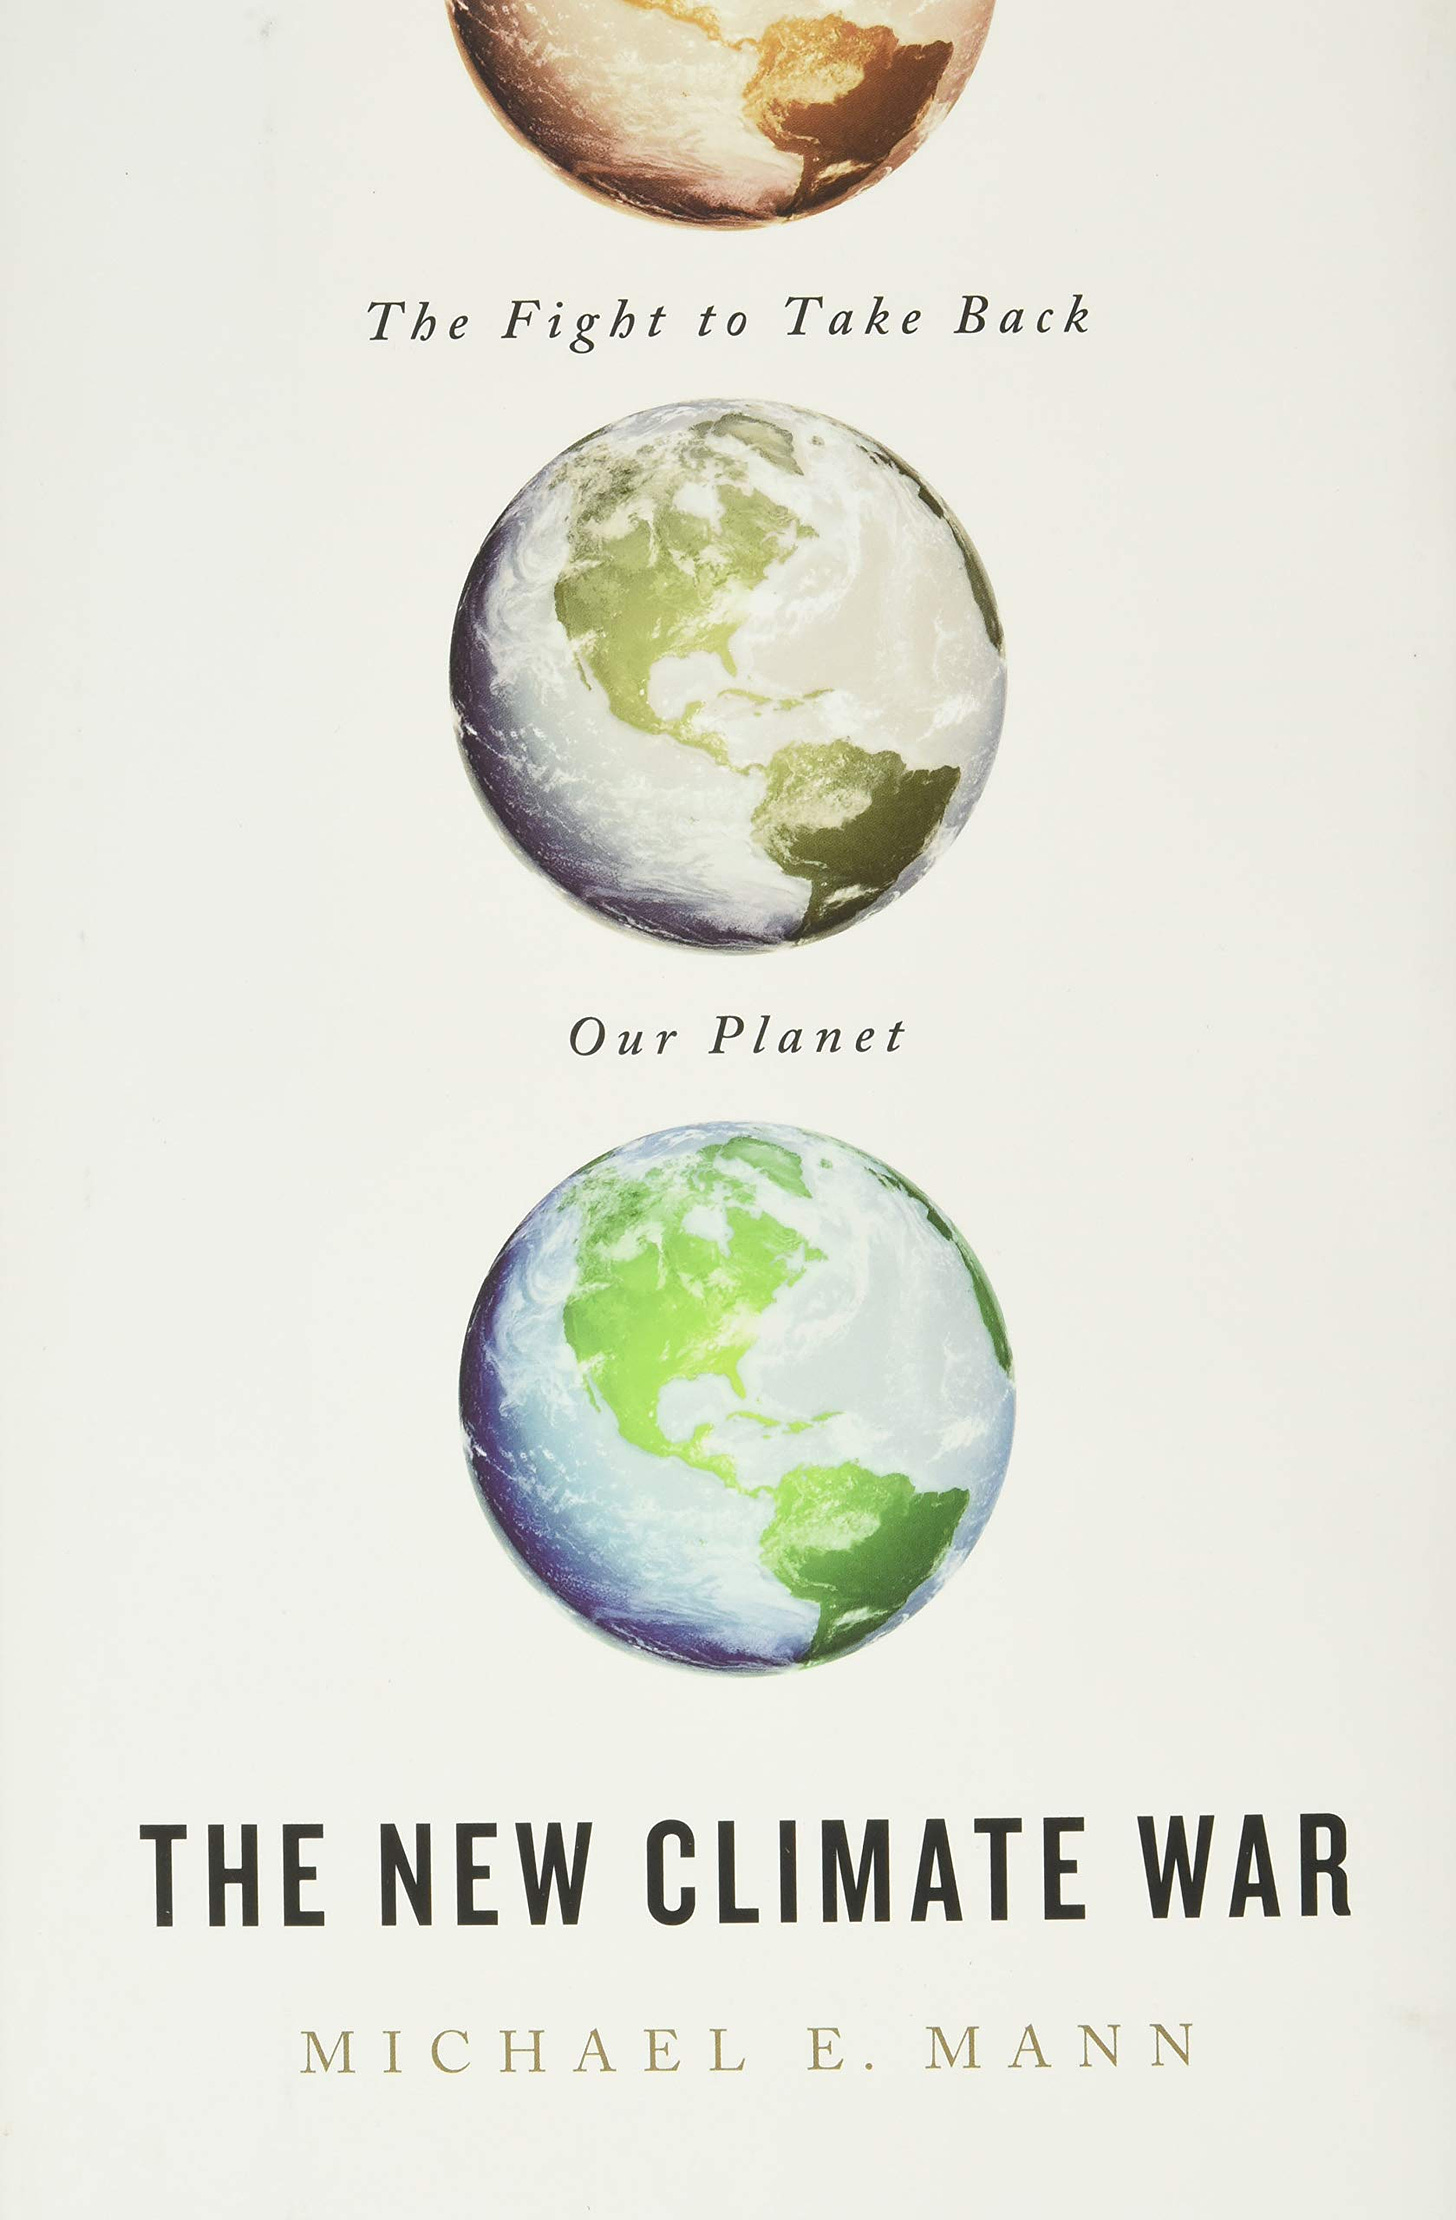 The New Climate War: The Fight to Take Back Our Planet: Mann, Michael E.:  9781541758230: Amazon.com: Books